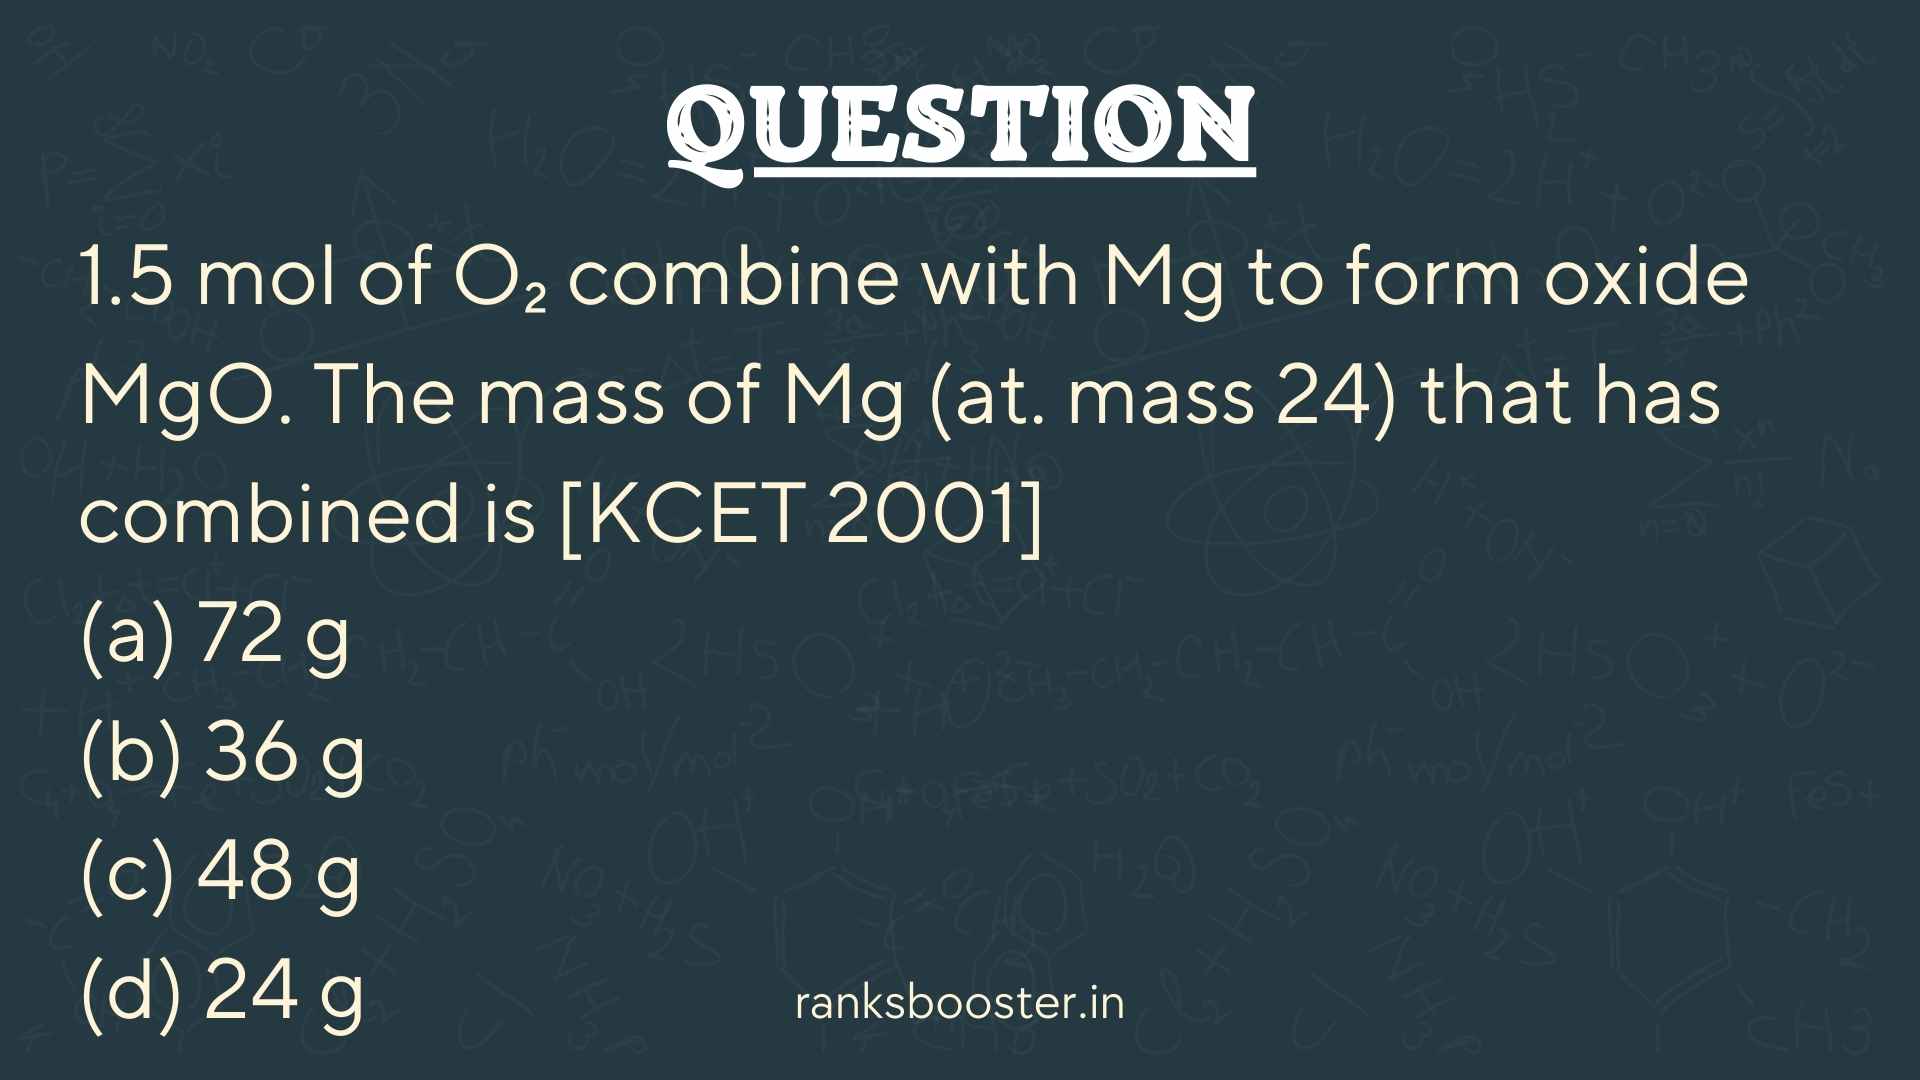 Question: 1.5 mol of O₂ combine with Mg to form oxide MgO. The mass of Mg (at. mass 24) that has combined is [KCET 2001] (a) 72 g (b) 36 g (c) 48 g (d) 24 g